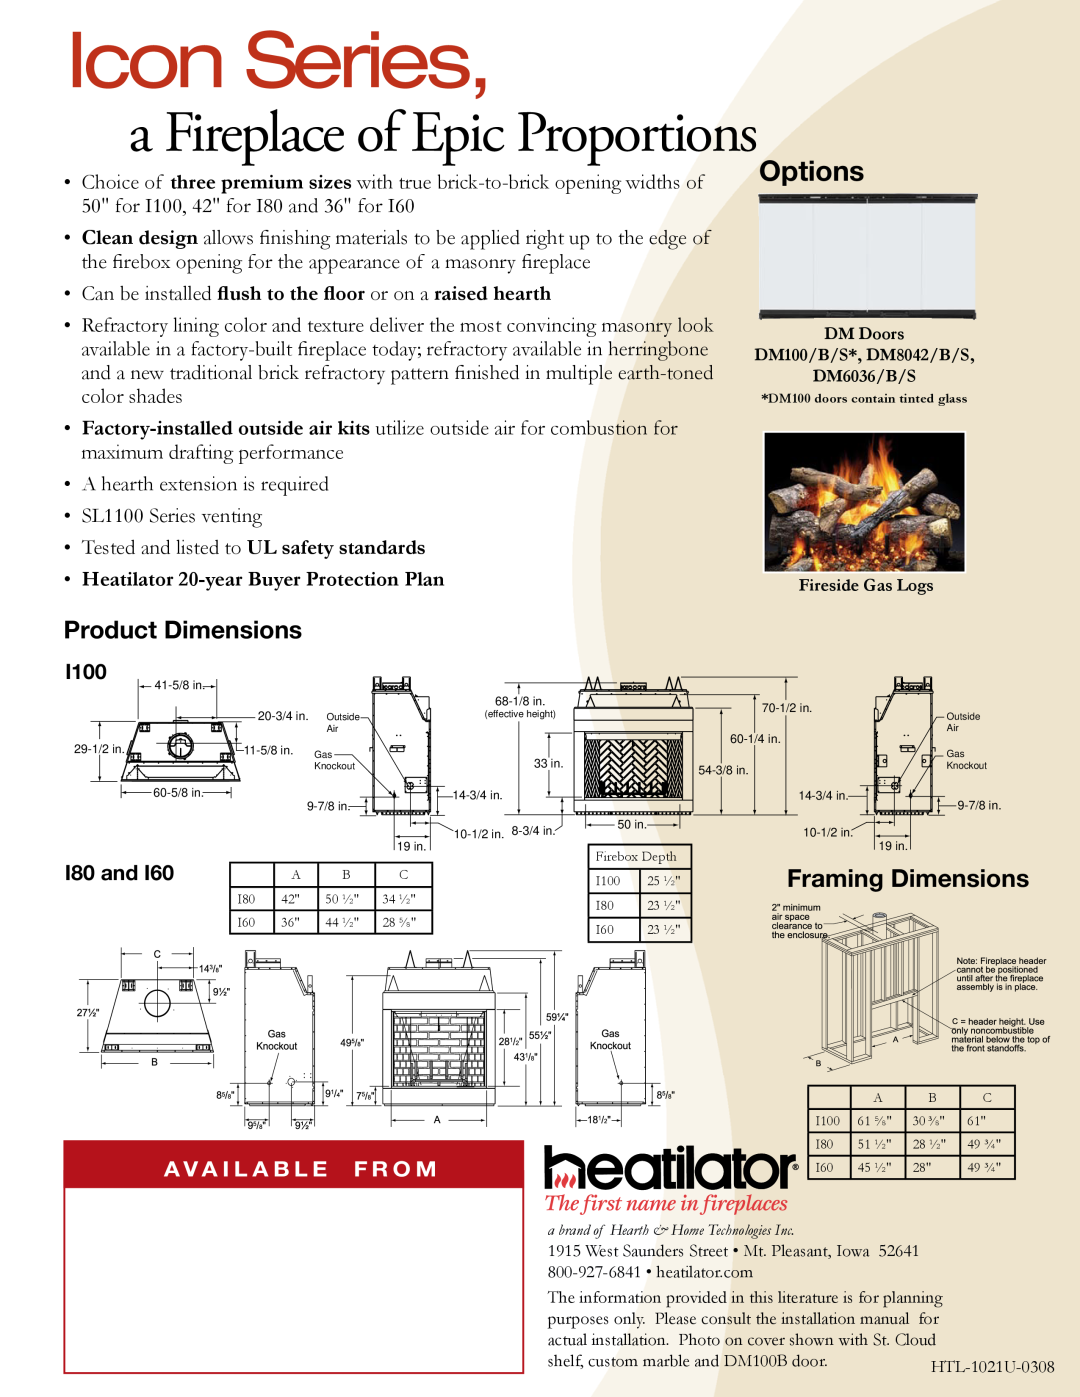 Hearth and Home Technologies Icon Series a Fireplace of Epic Proportions, Options, Product Dimensions, Framing Dimensions 